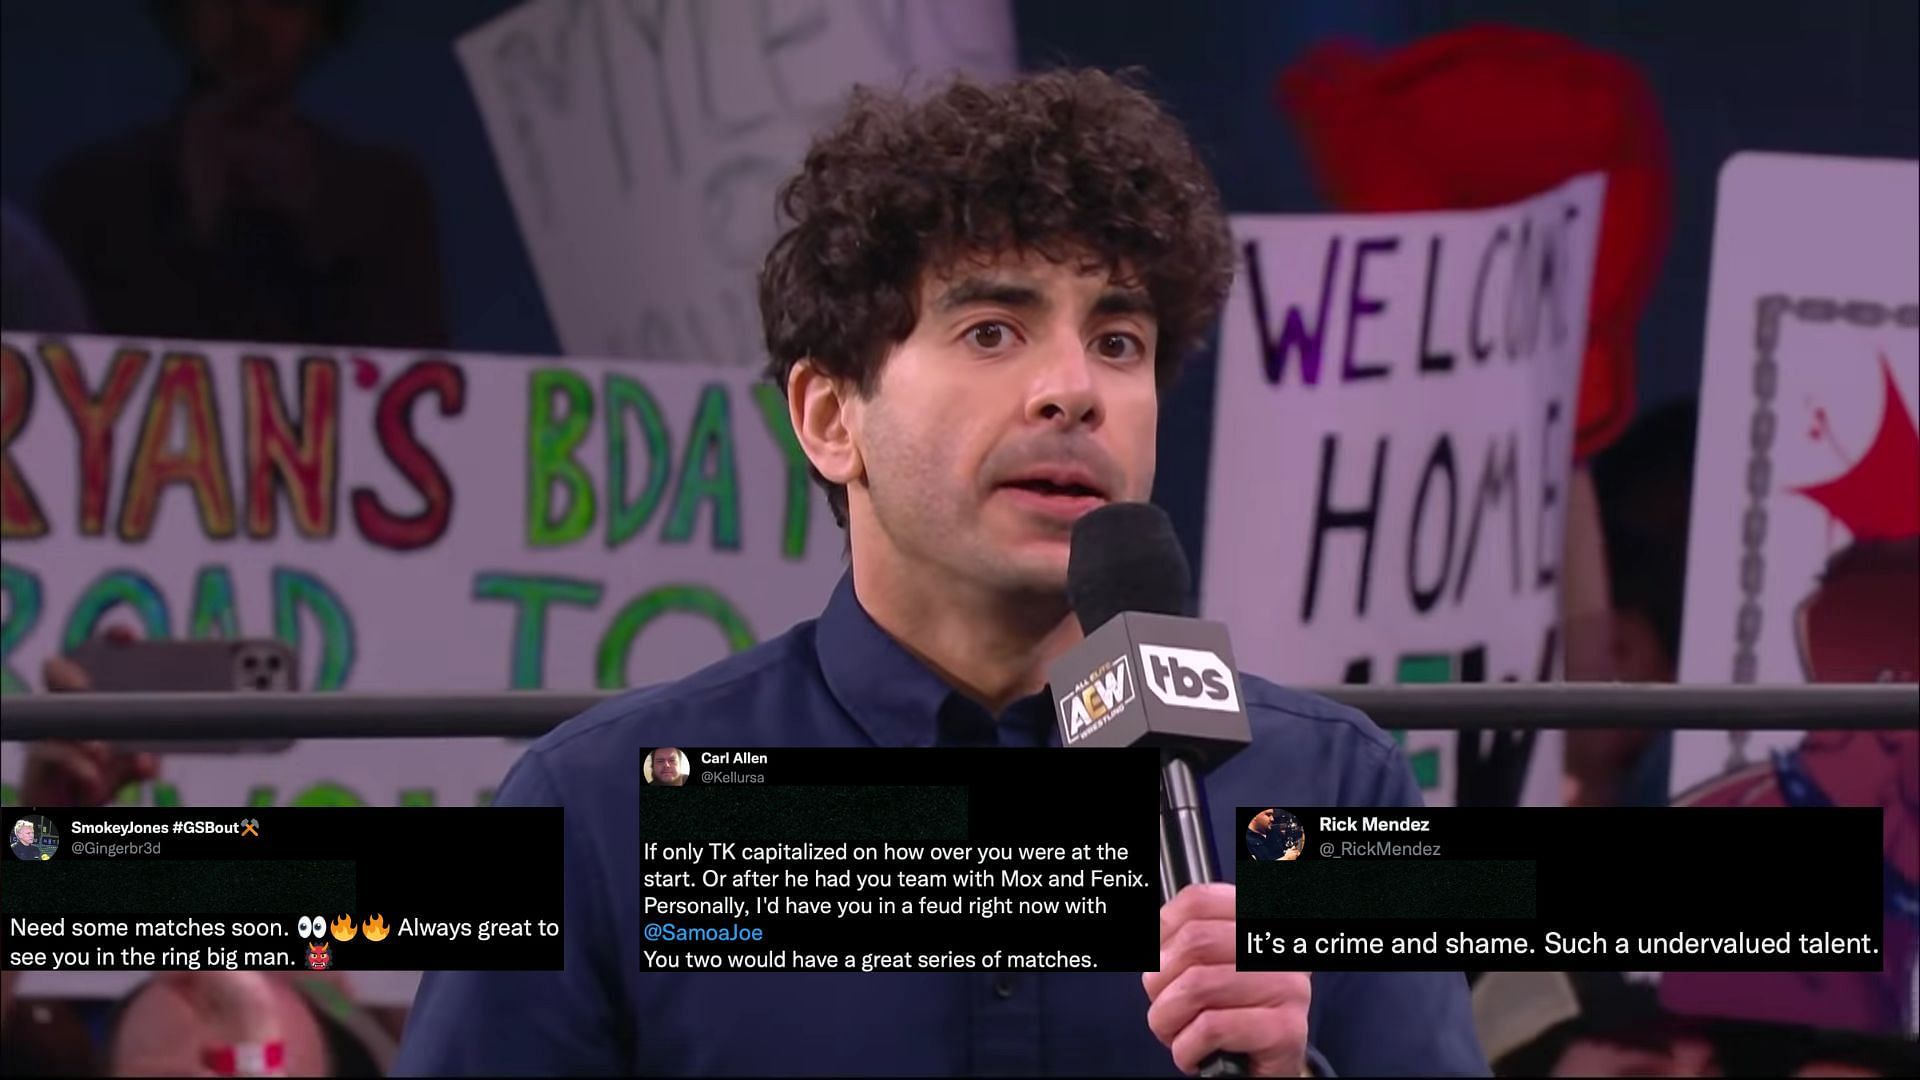 Has Tony Khan dropped the ball with this AEW star?